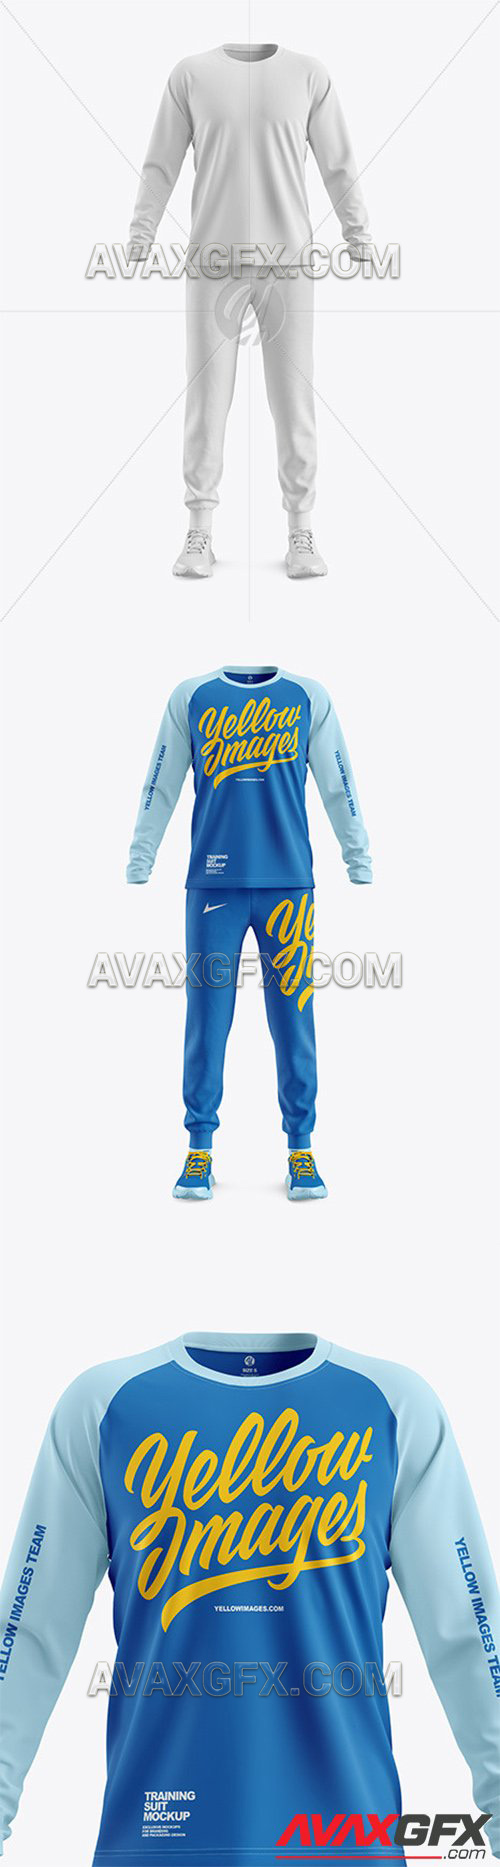 Download Men's Training Suit Mockup - Front View 56897 » AVAXGFX ...